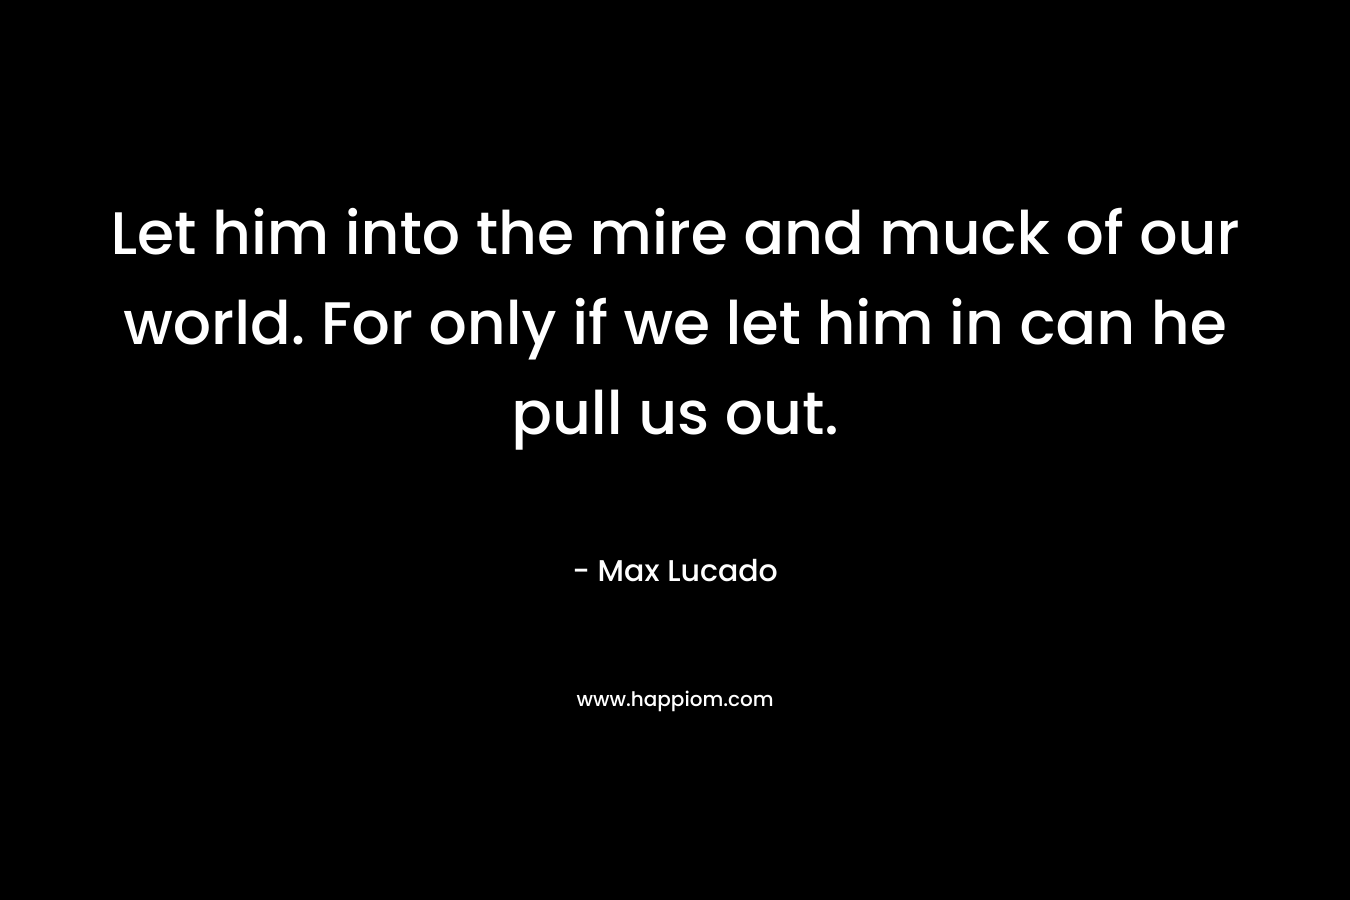 Let him into the mire and muck of our world. For only if we let him in can he pull us out.